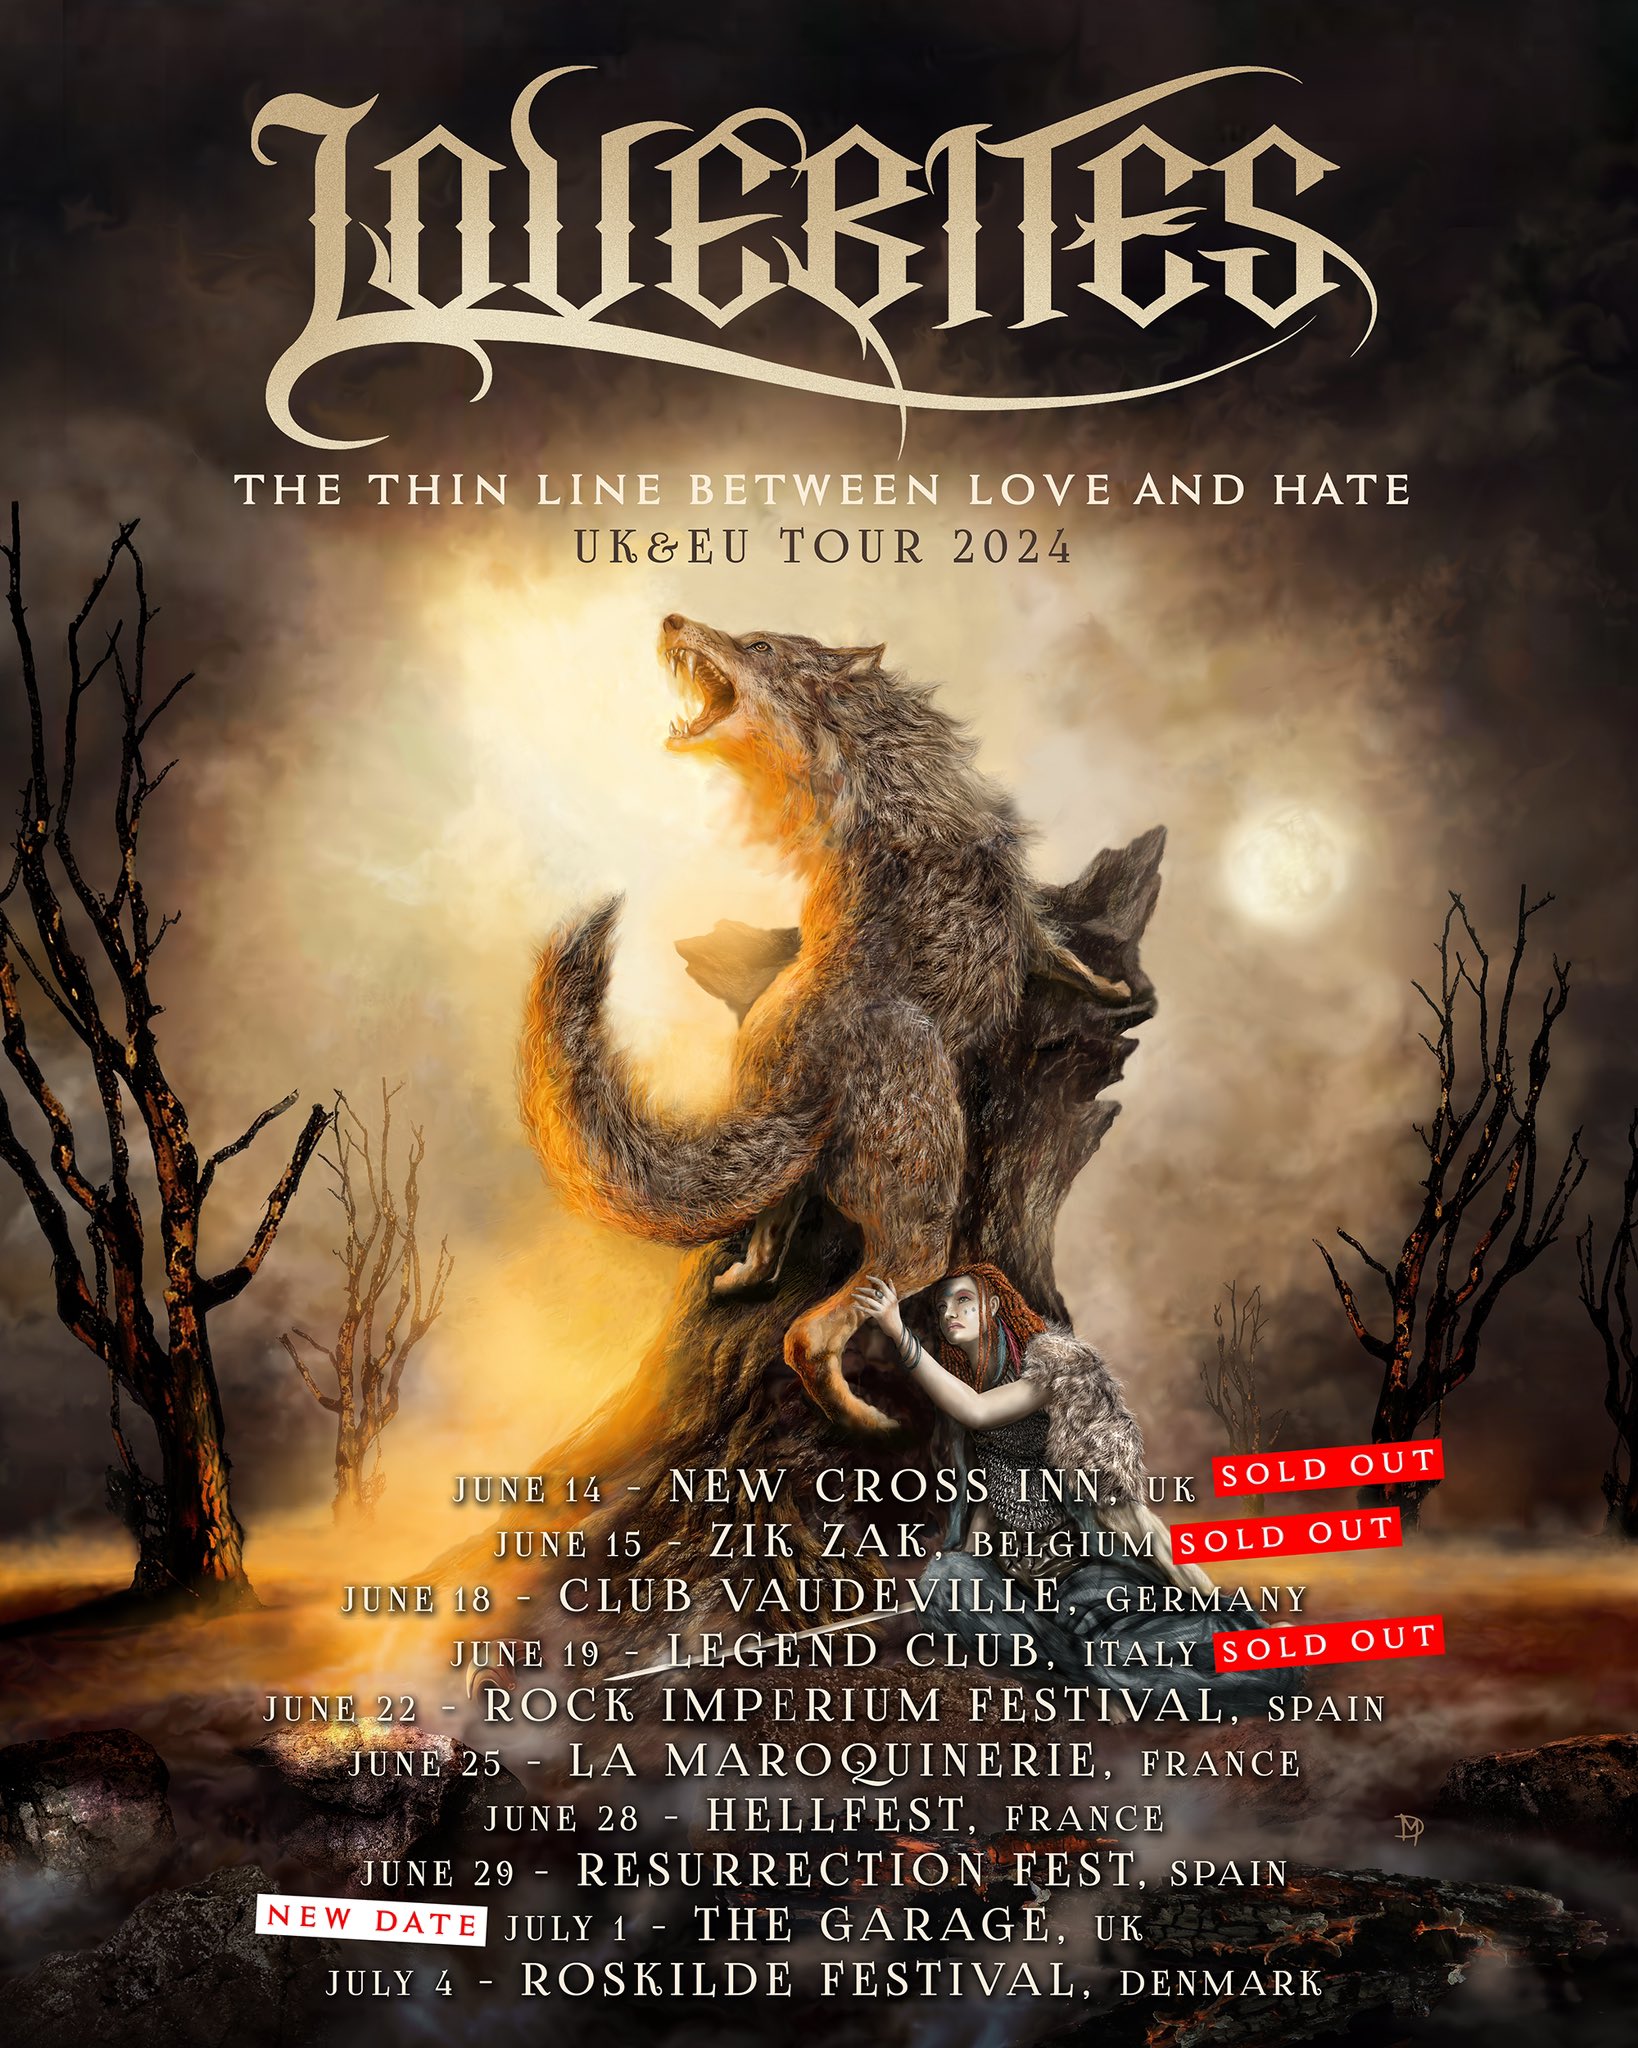 Lovebites Adds Second London Show Due to High Demand